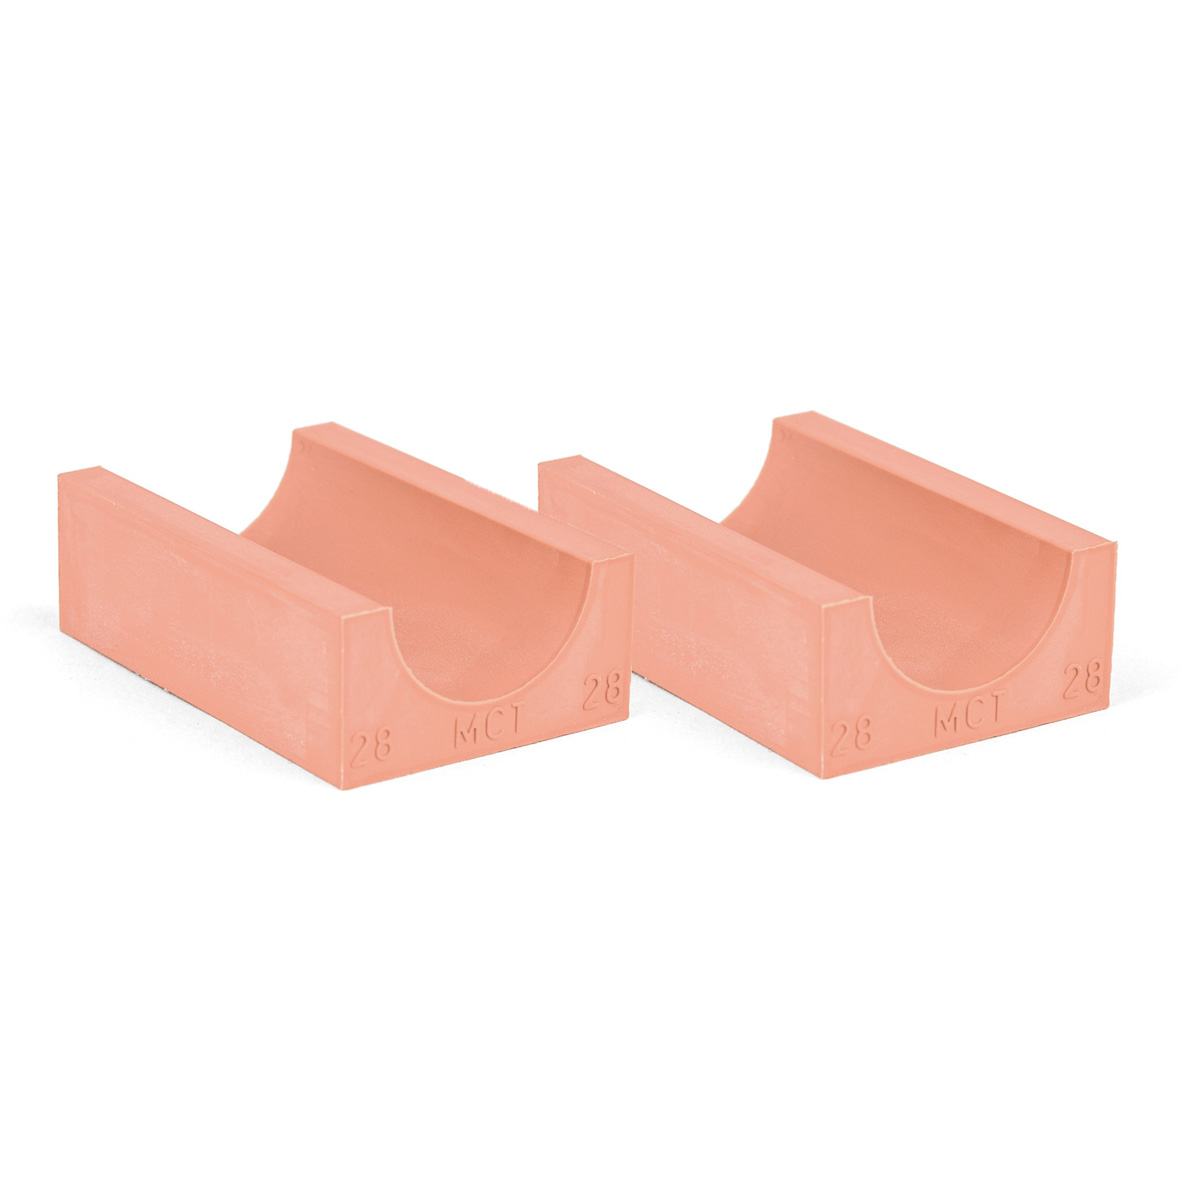 40-28*2 Set of 2 half insert block lycron, 40-28 for cable/pipe diam. 27.5-29.5mm